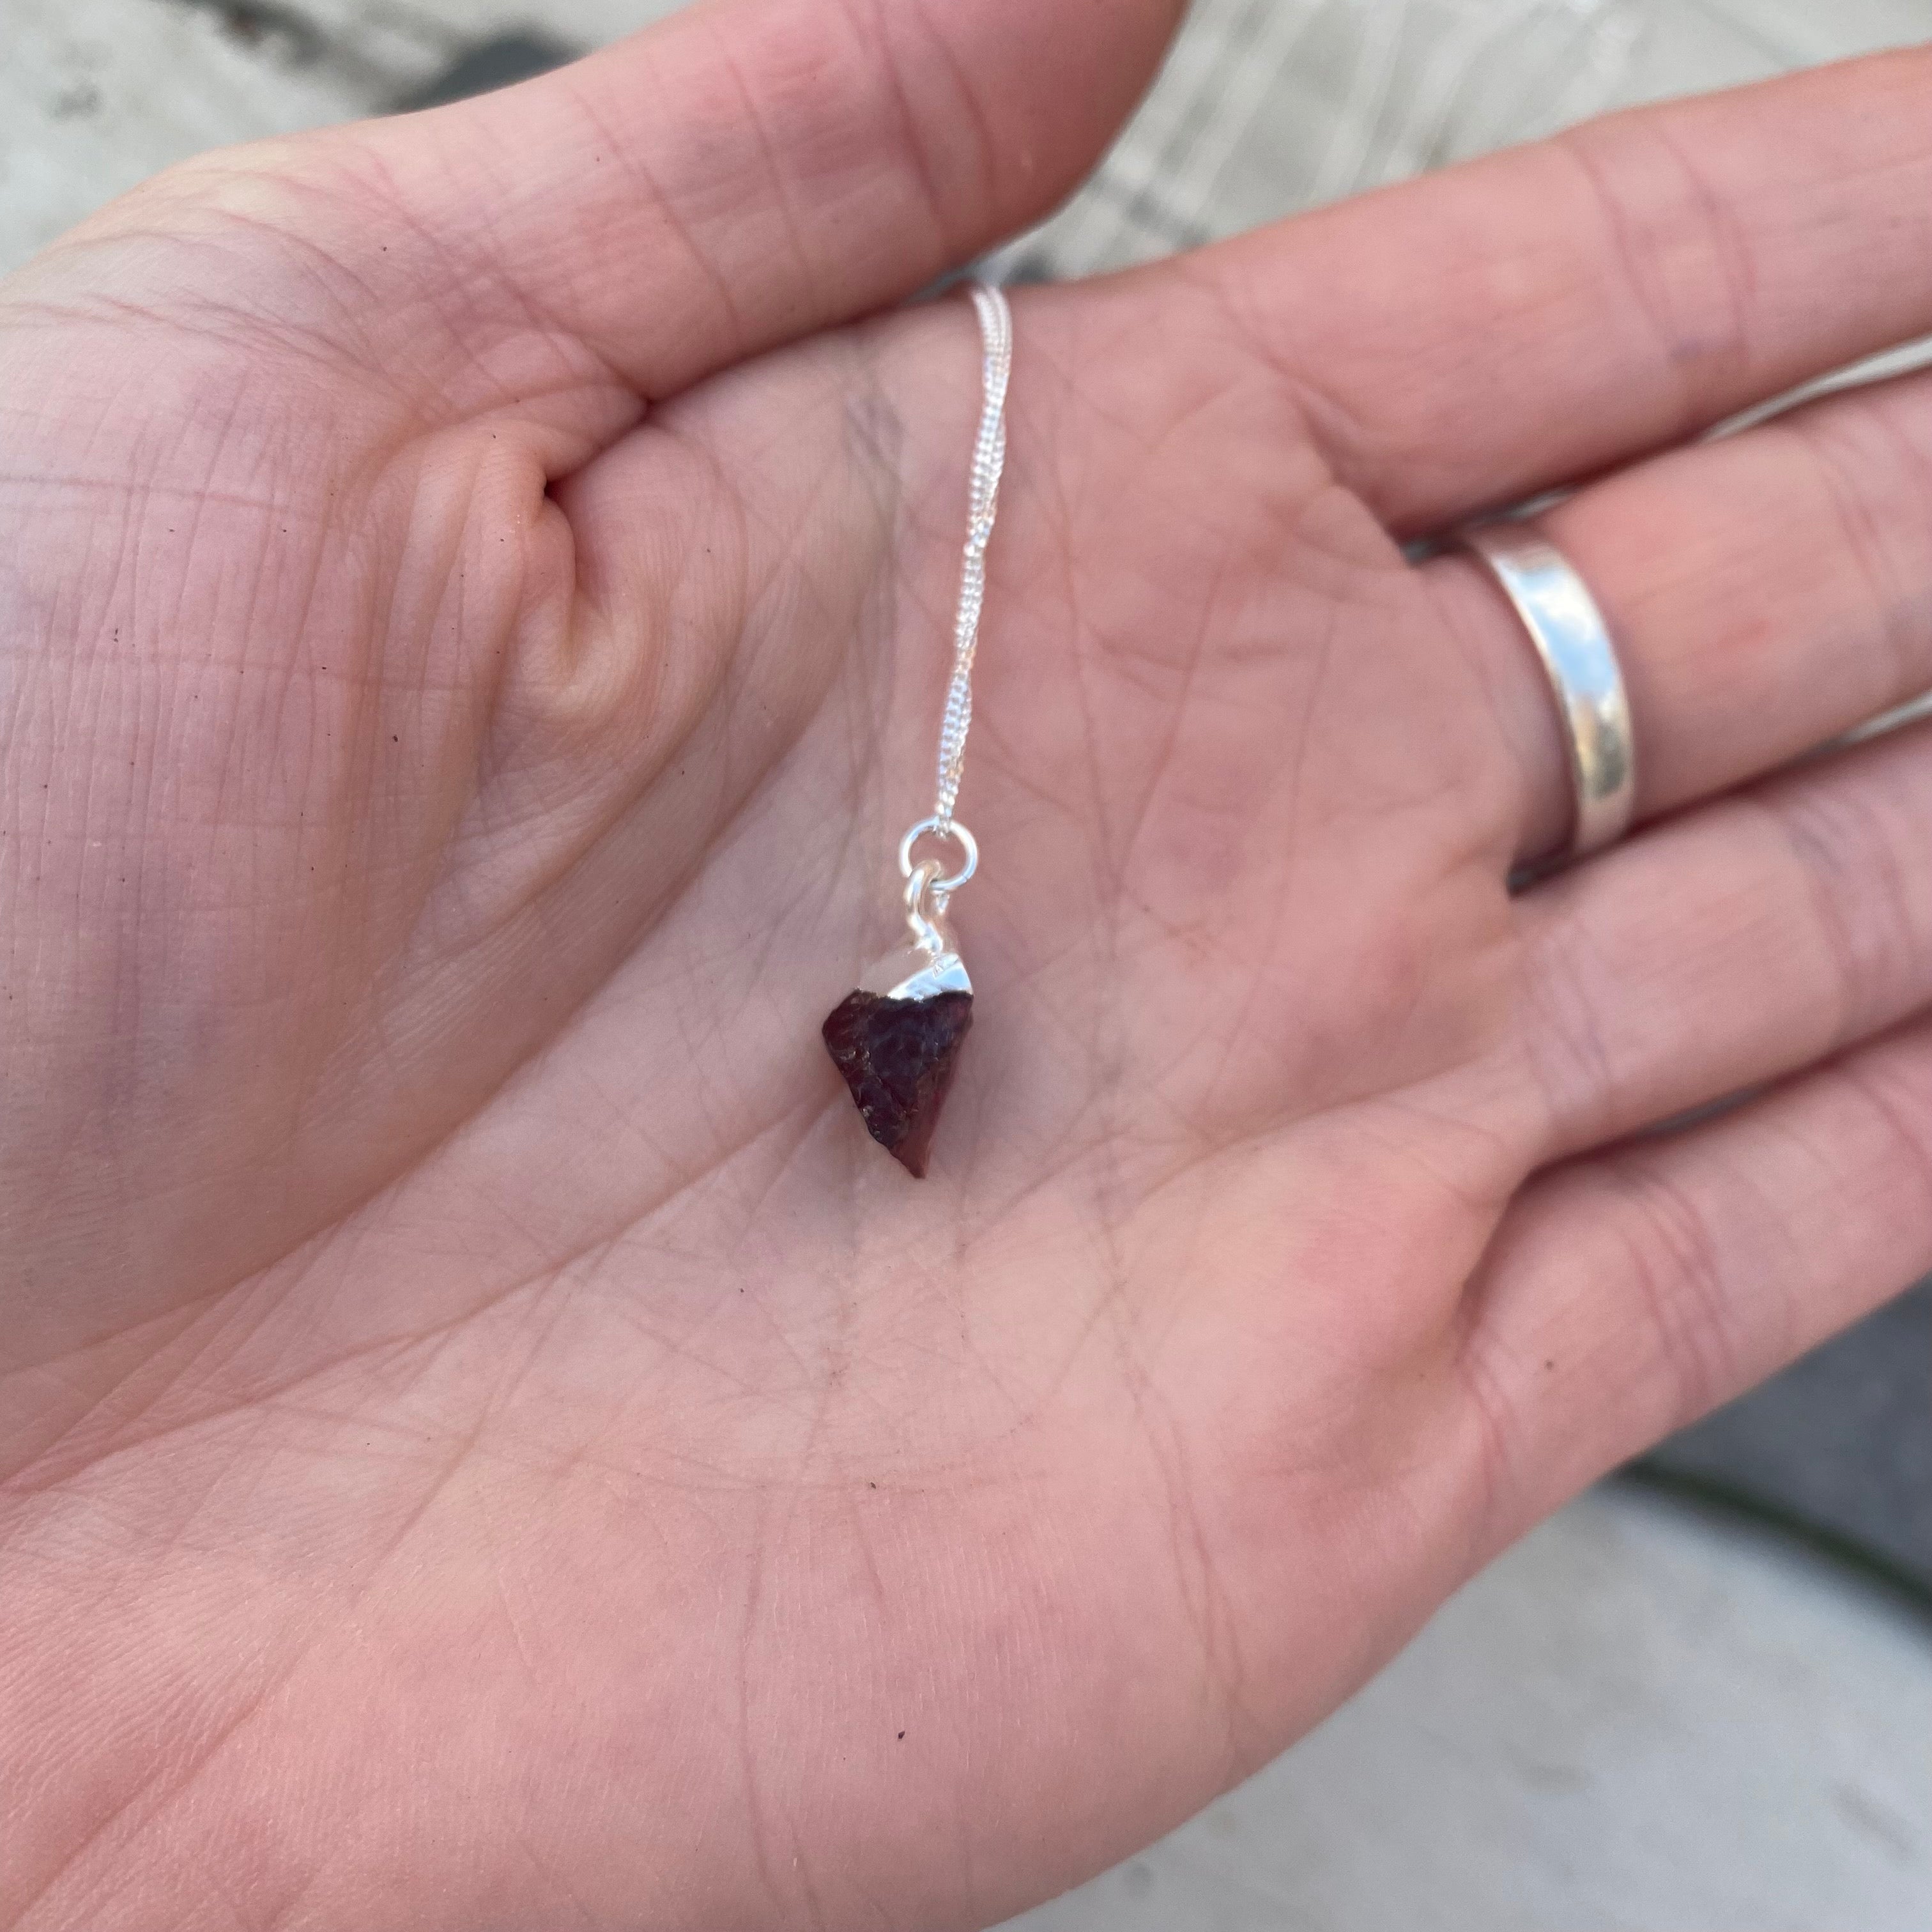 Birthstone Necklace - Raw Crystal and Sterling Silver January Garnet 16"